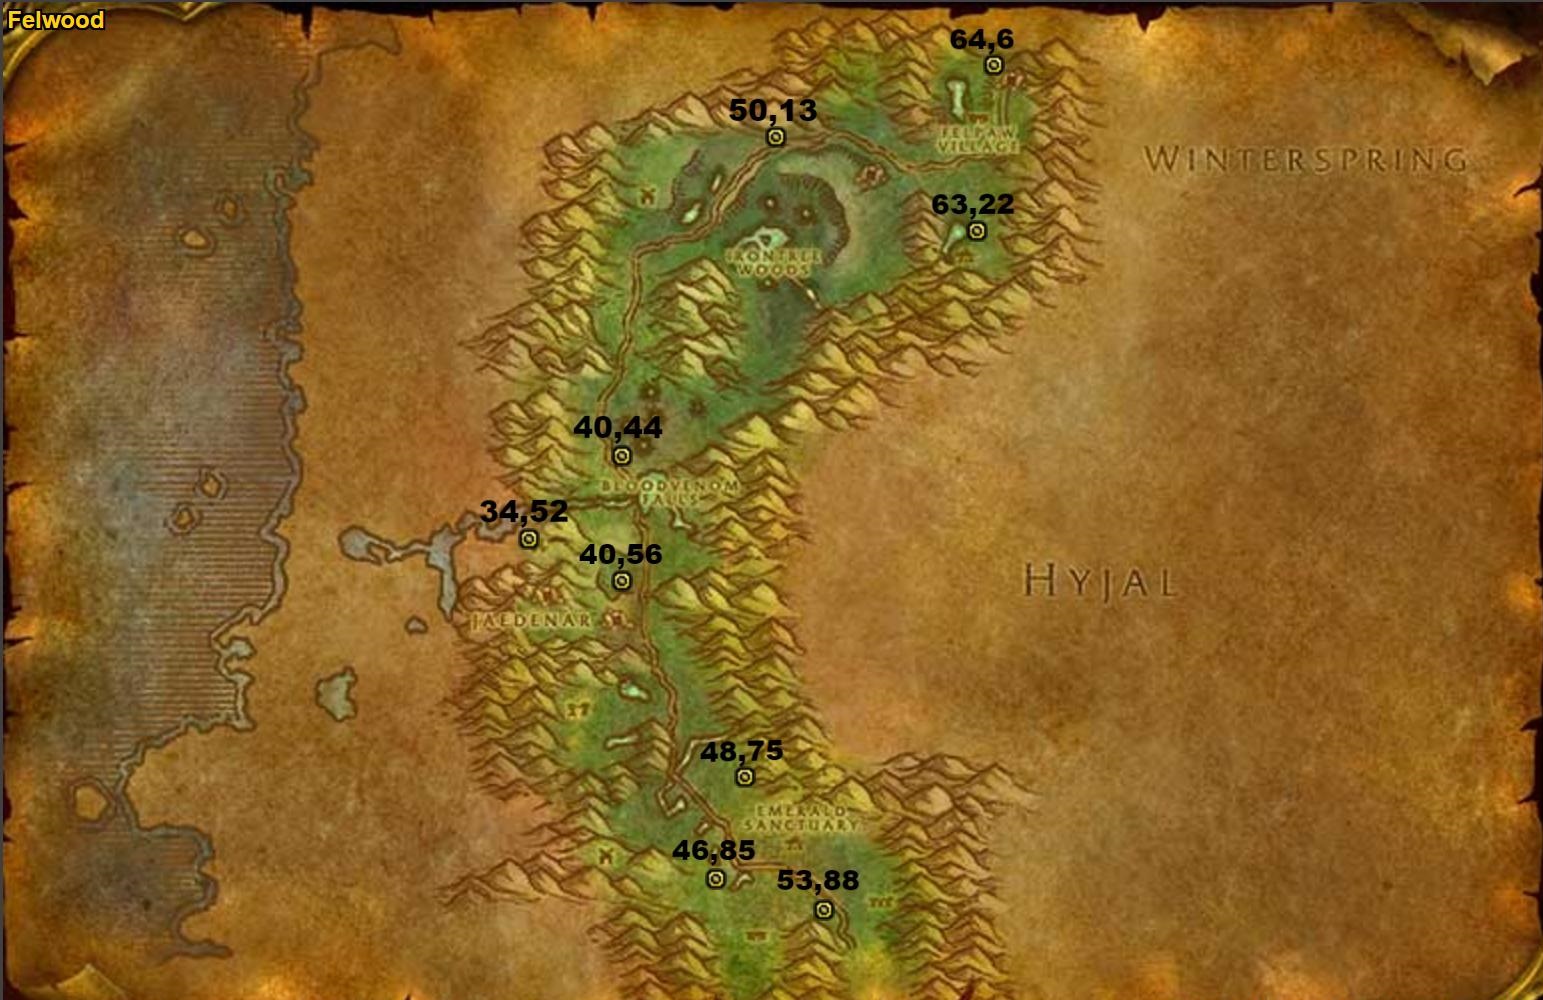 WoW Classic - Felwood Corrupted Songflower Locations Guide